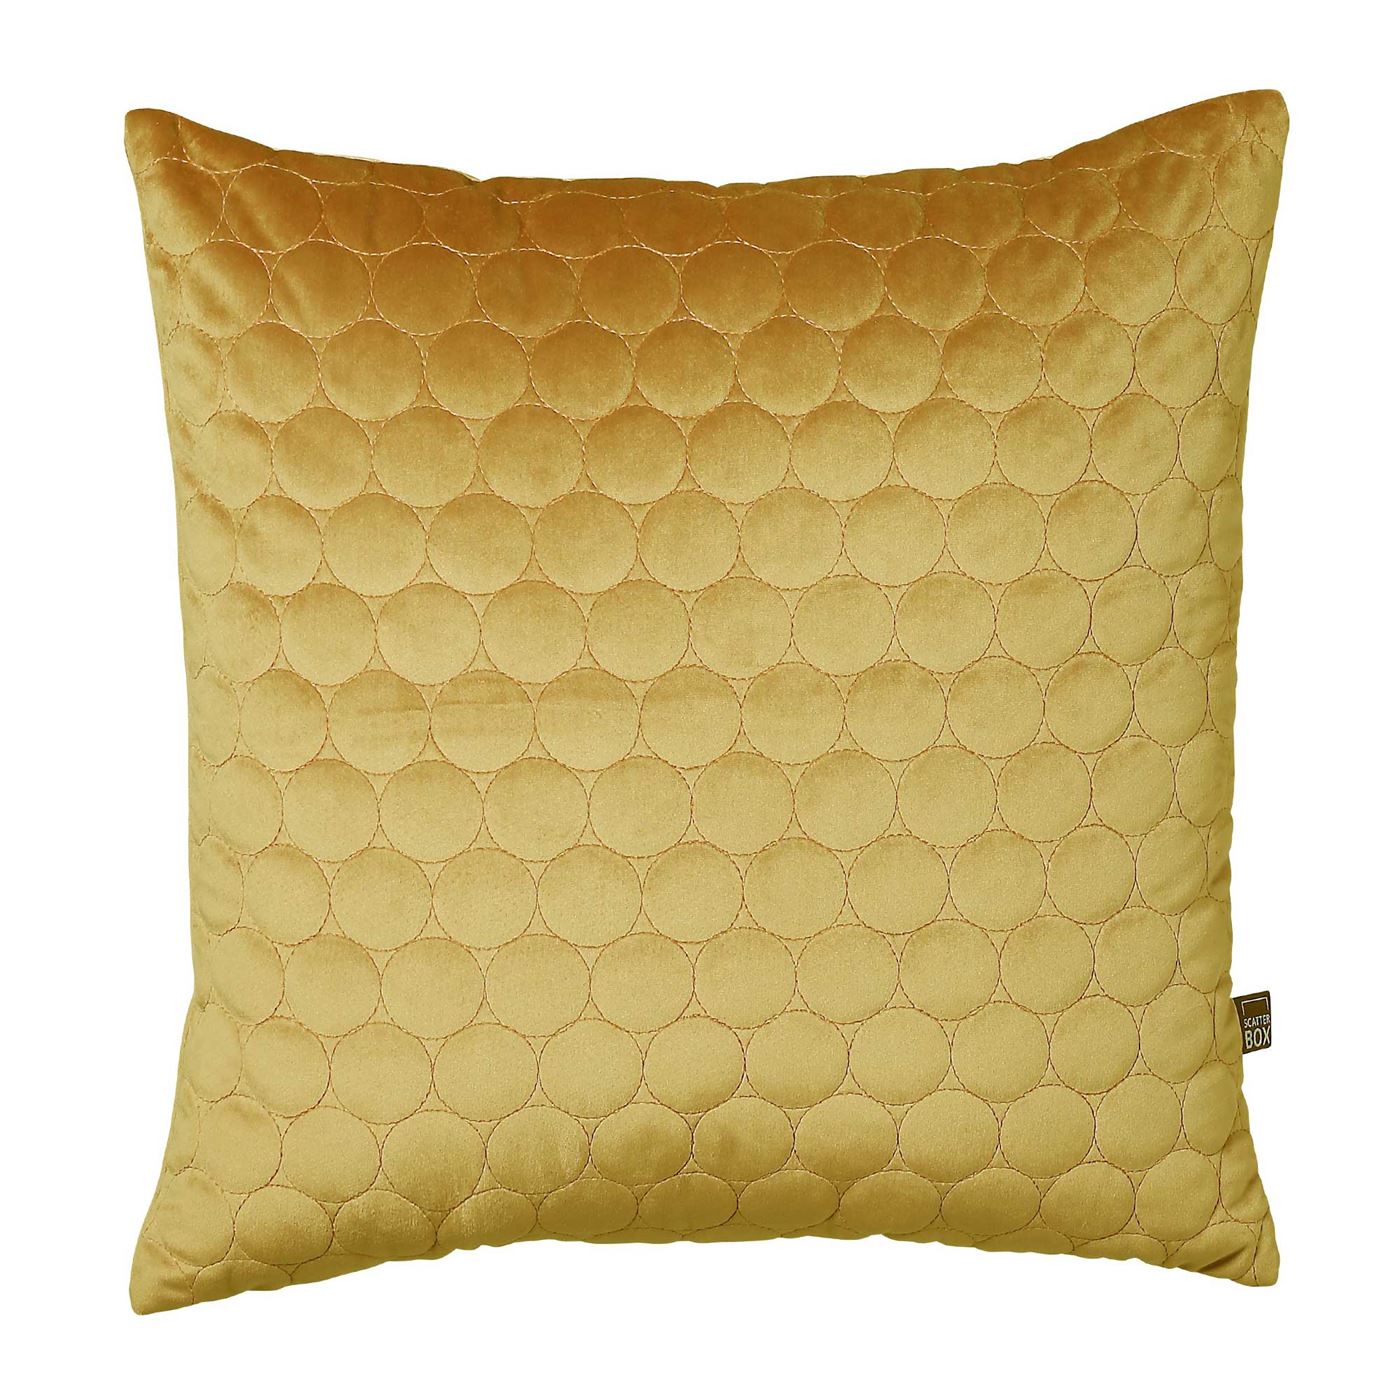 Geo Antique Gold Cushion, Square | Barker & Stonehouse